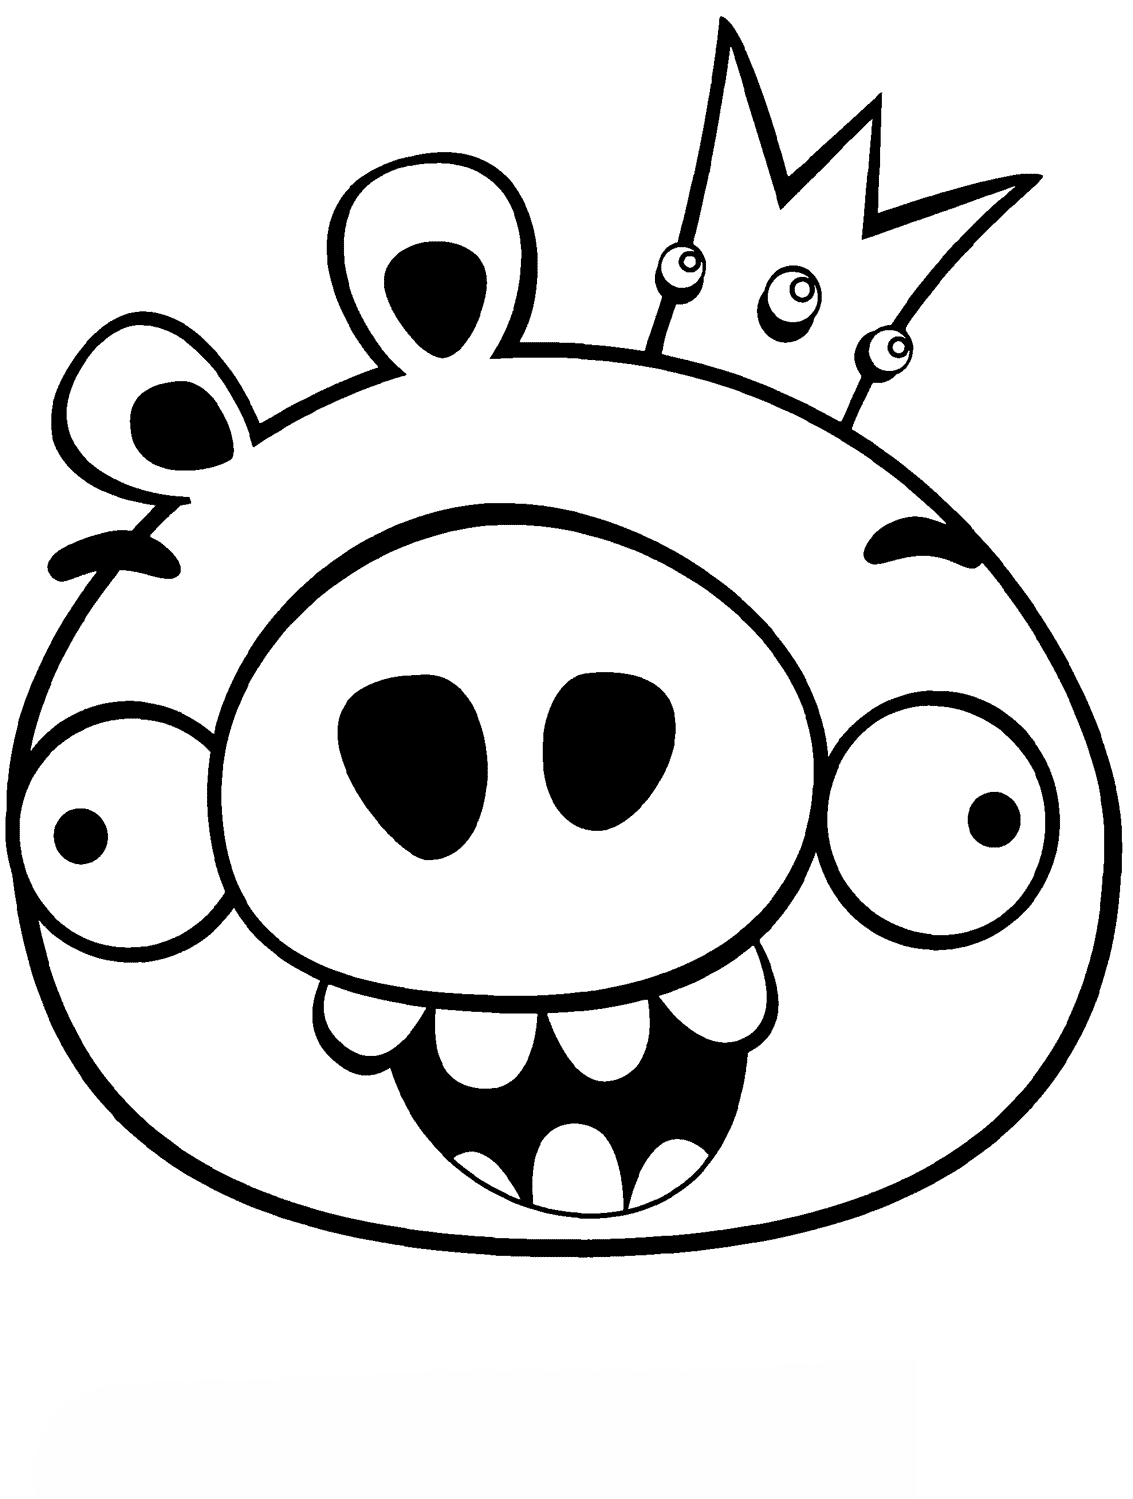 Smiling King Pig Coloring Page